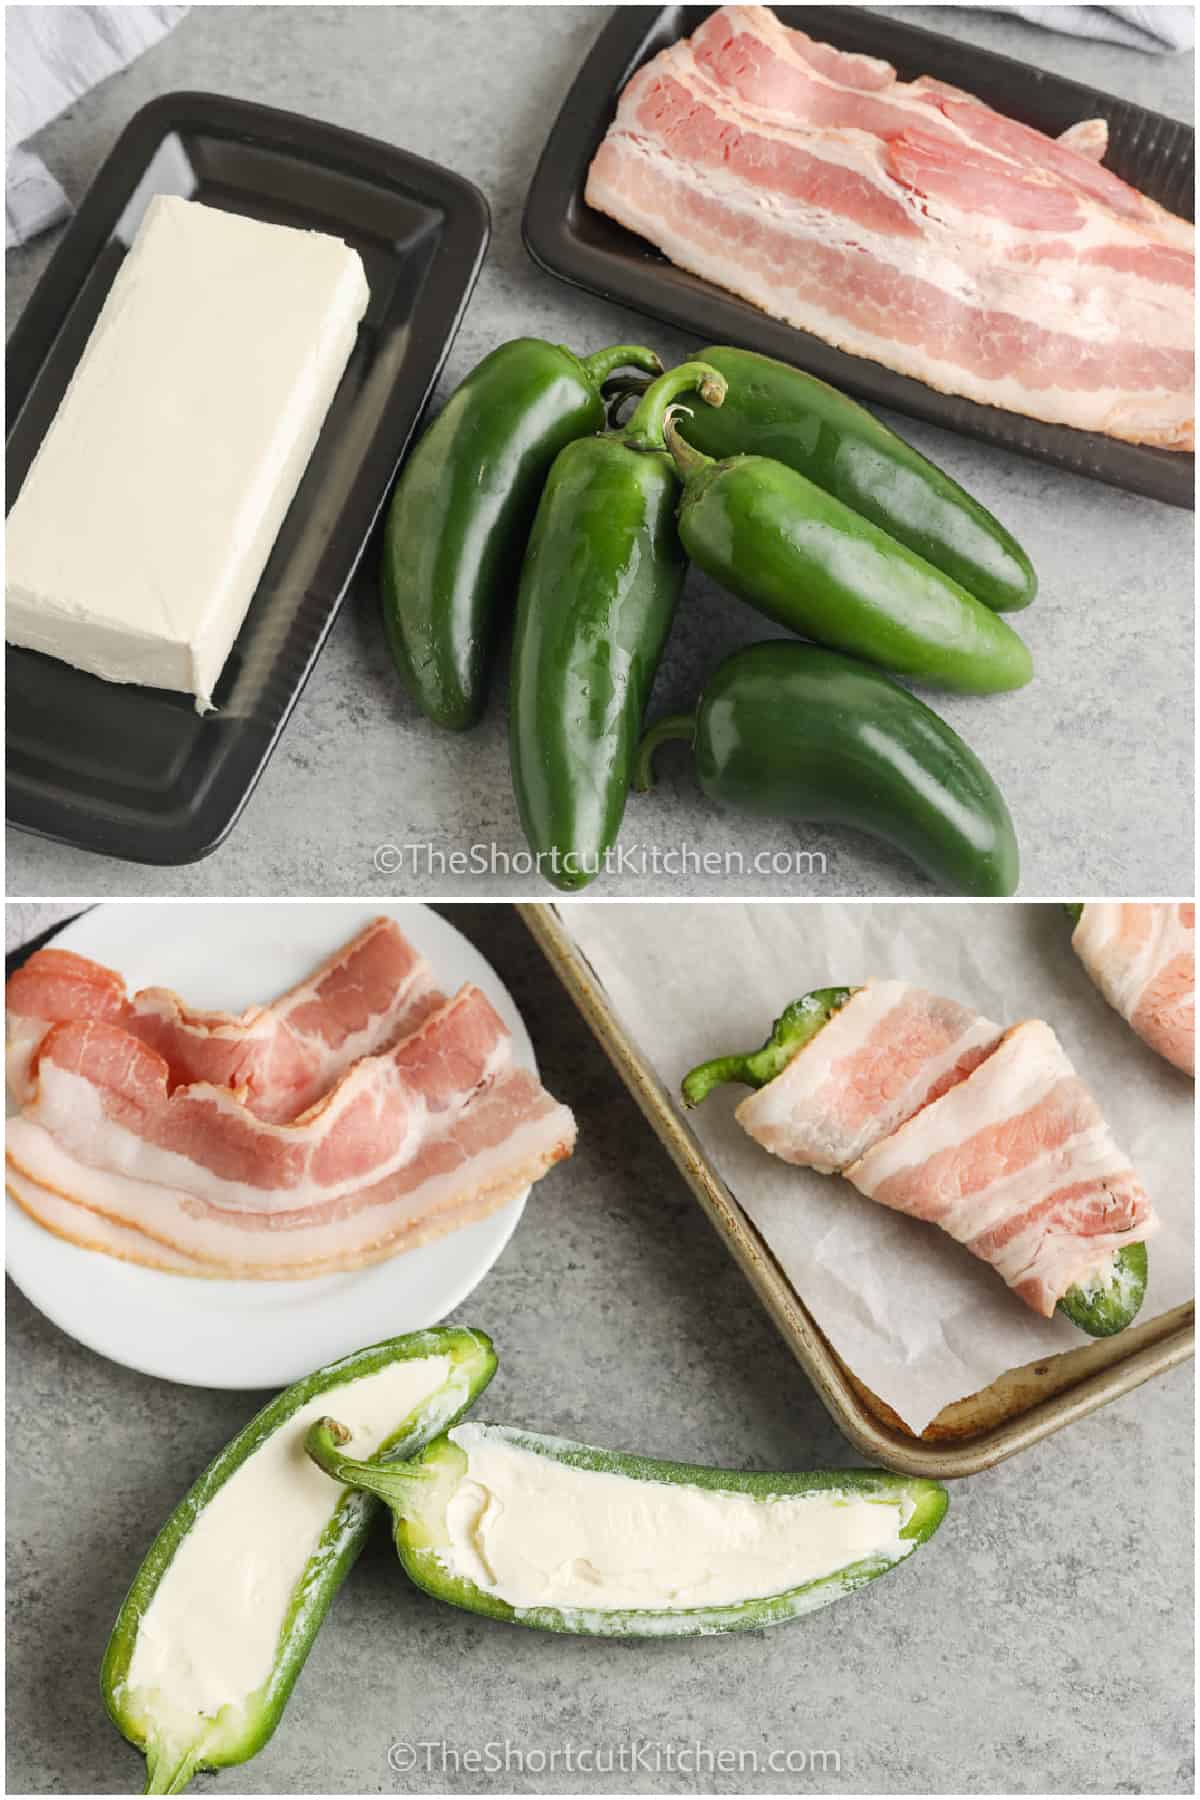 ingredients to make Bacon Wrapped Stuffed Jalapenos, and the process to make them.